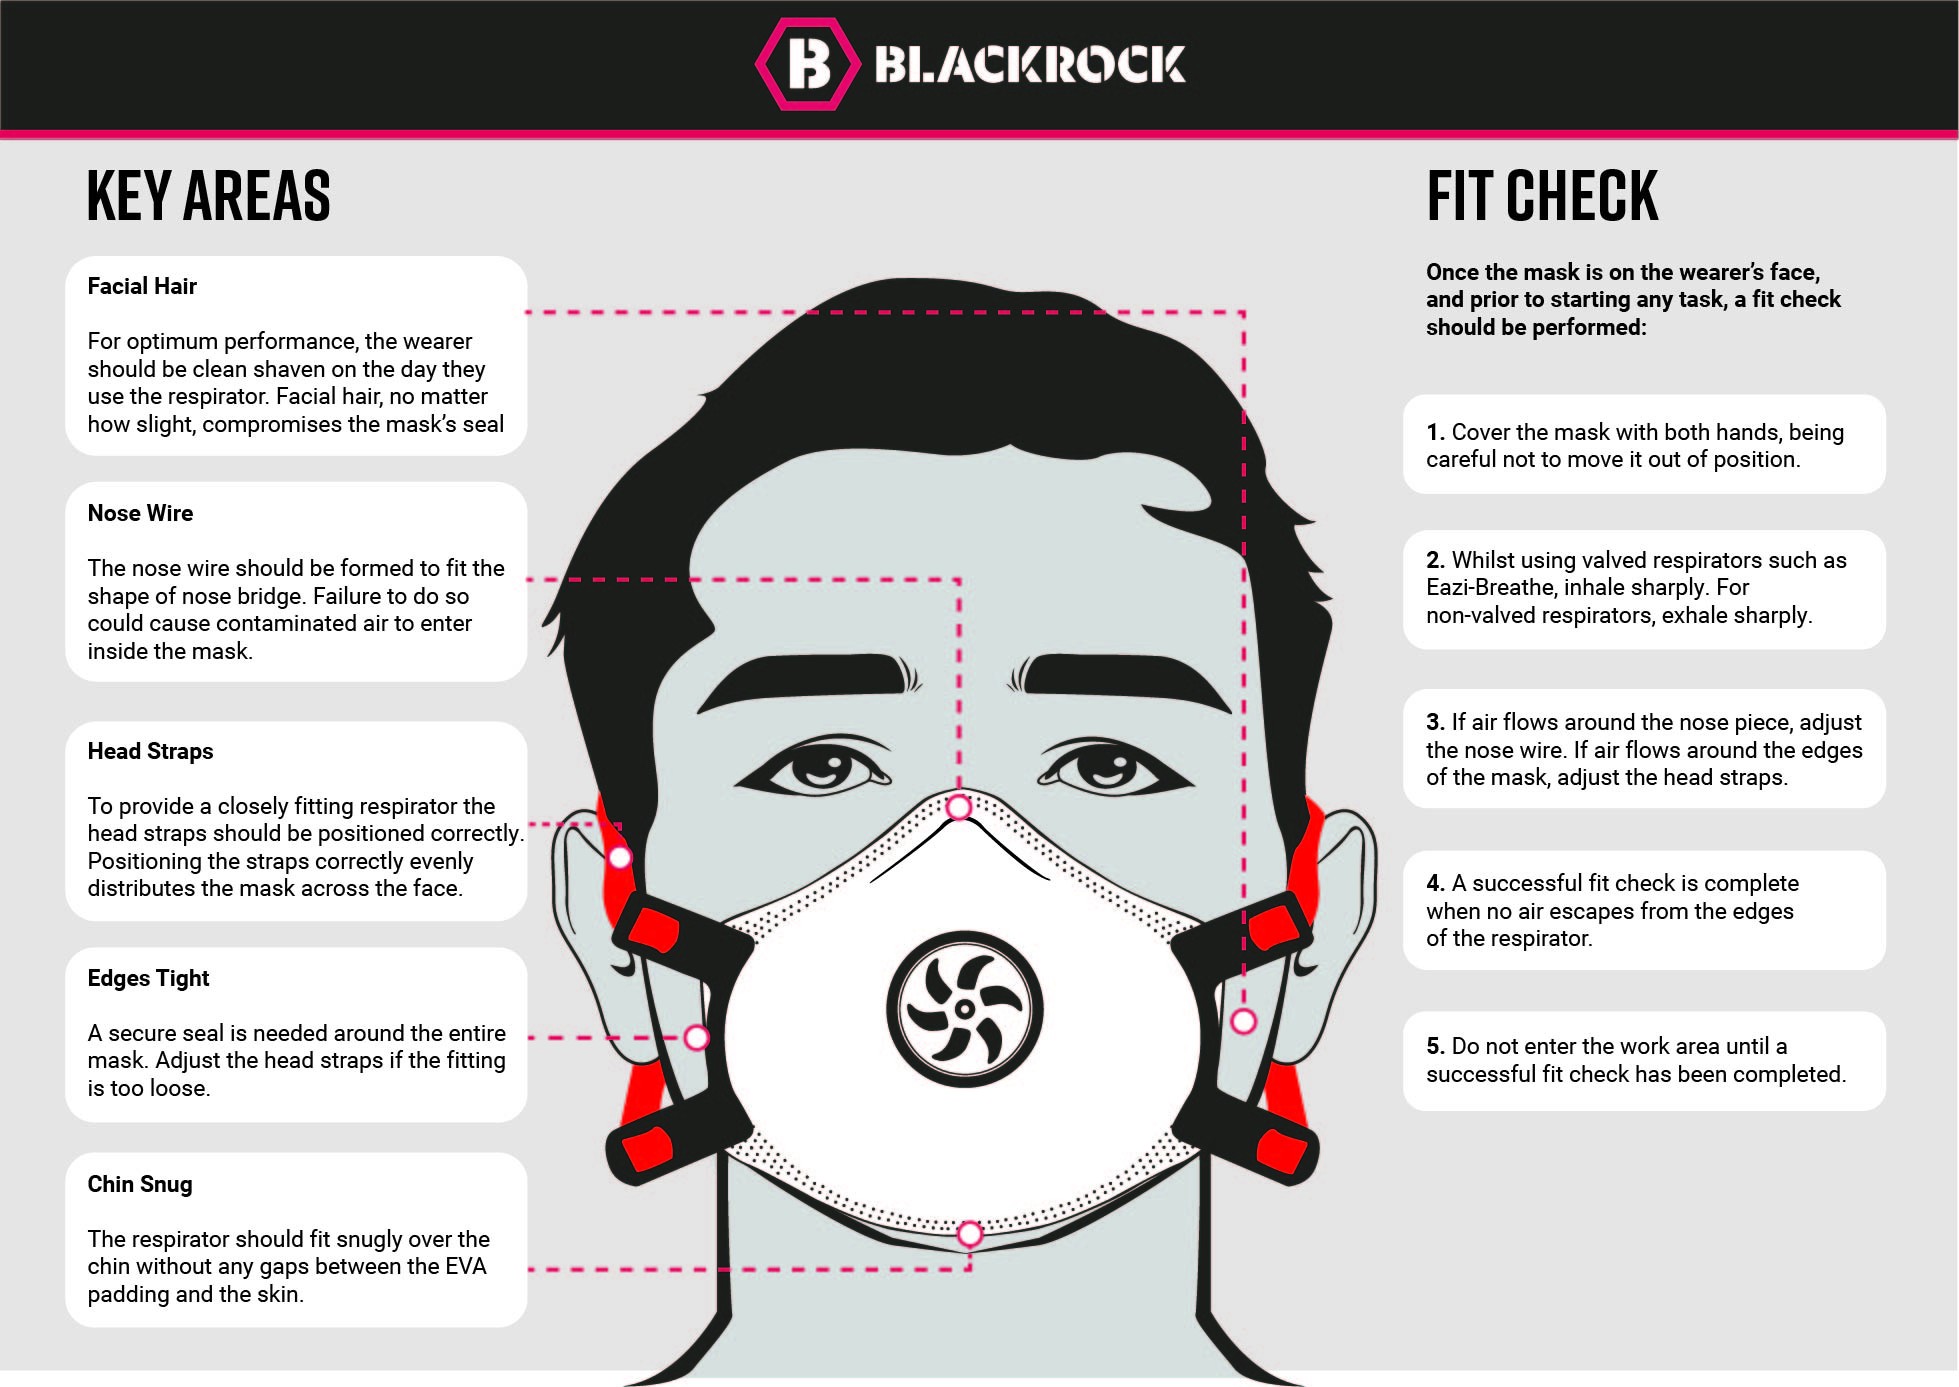 How to Correctly Wear a Respiratory Face Mask